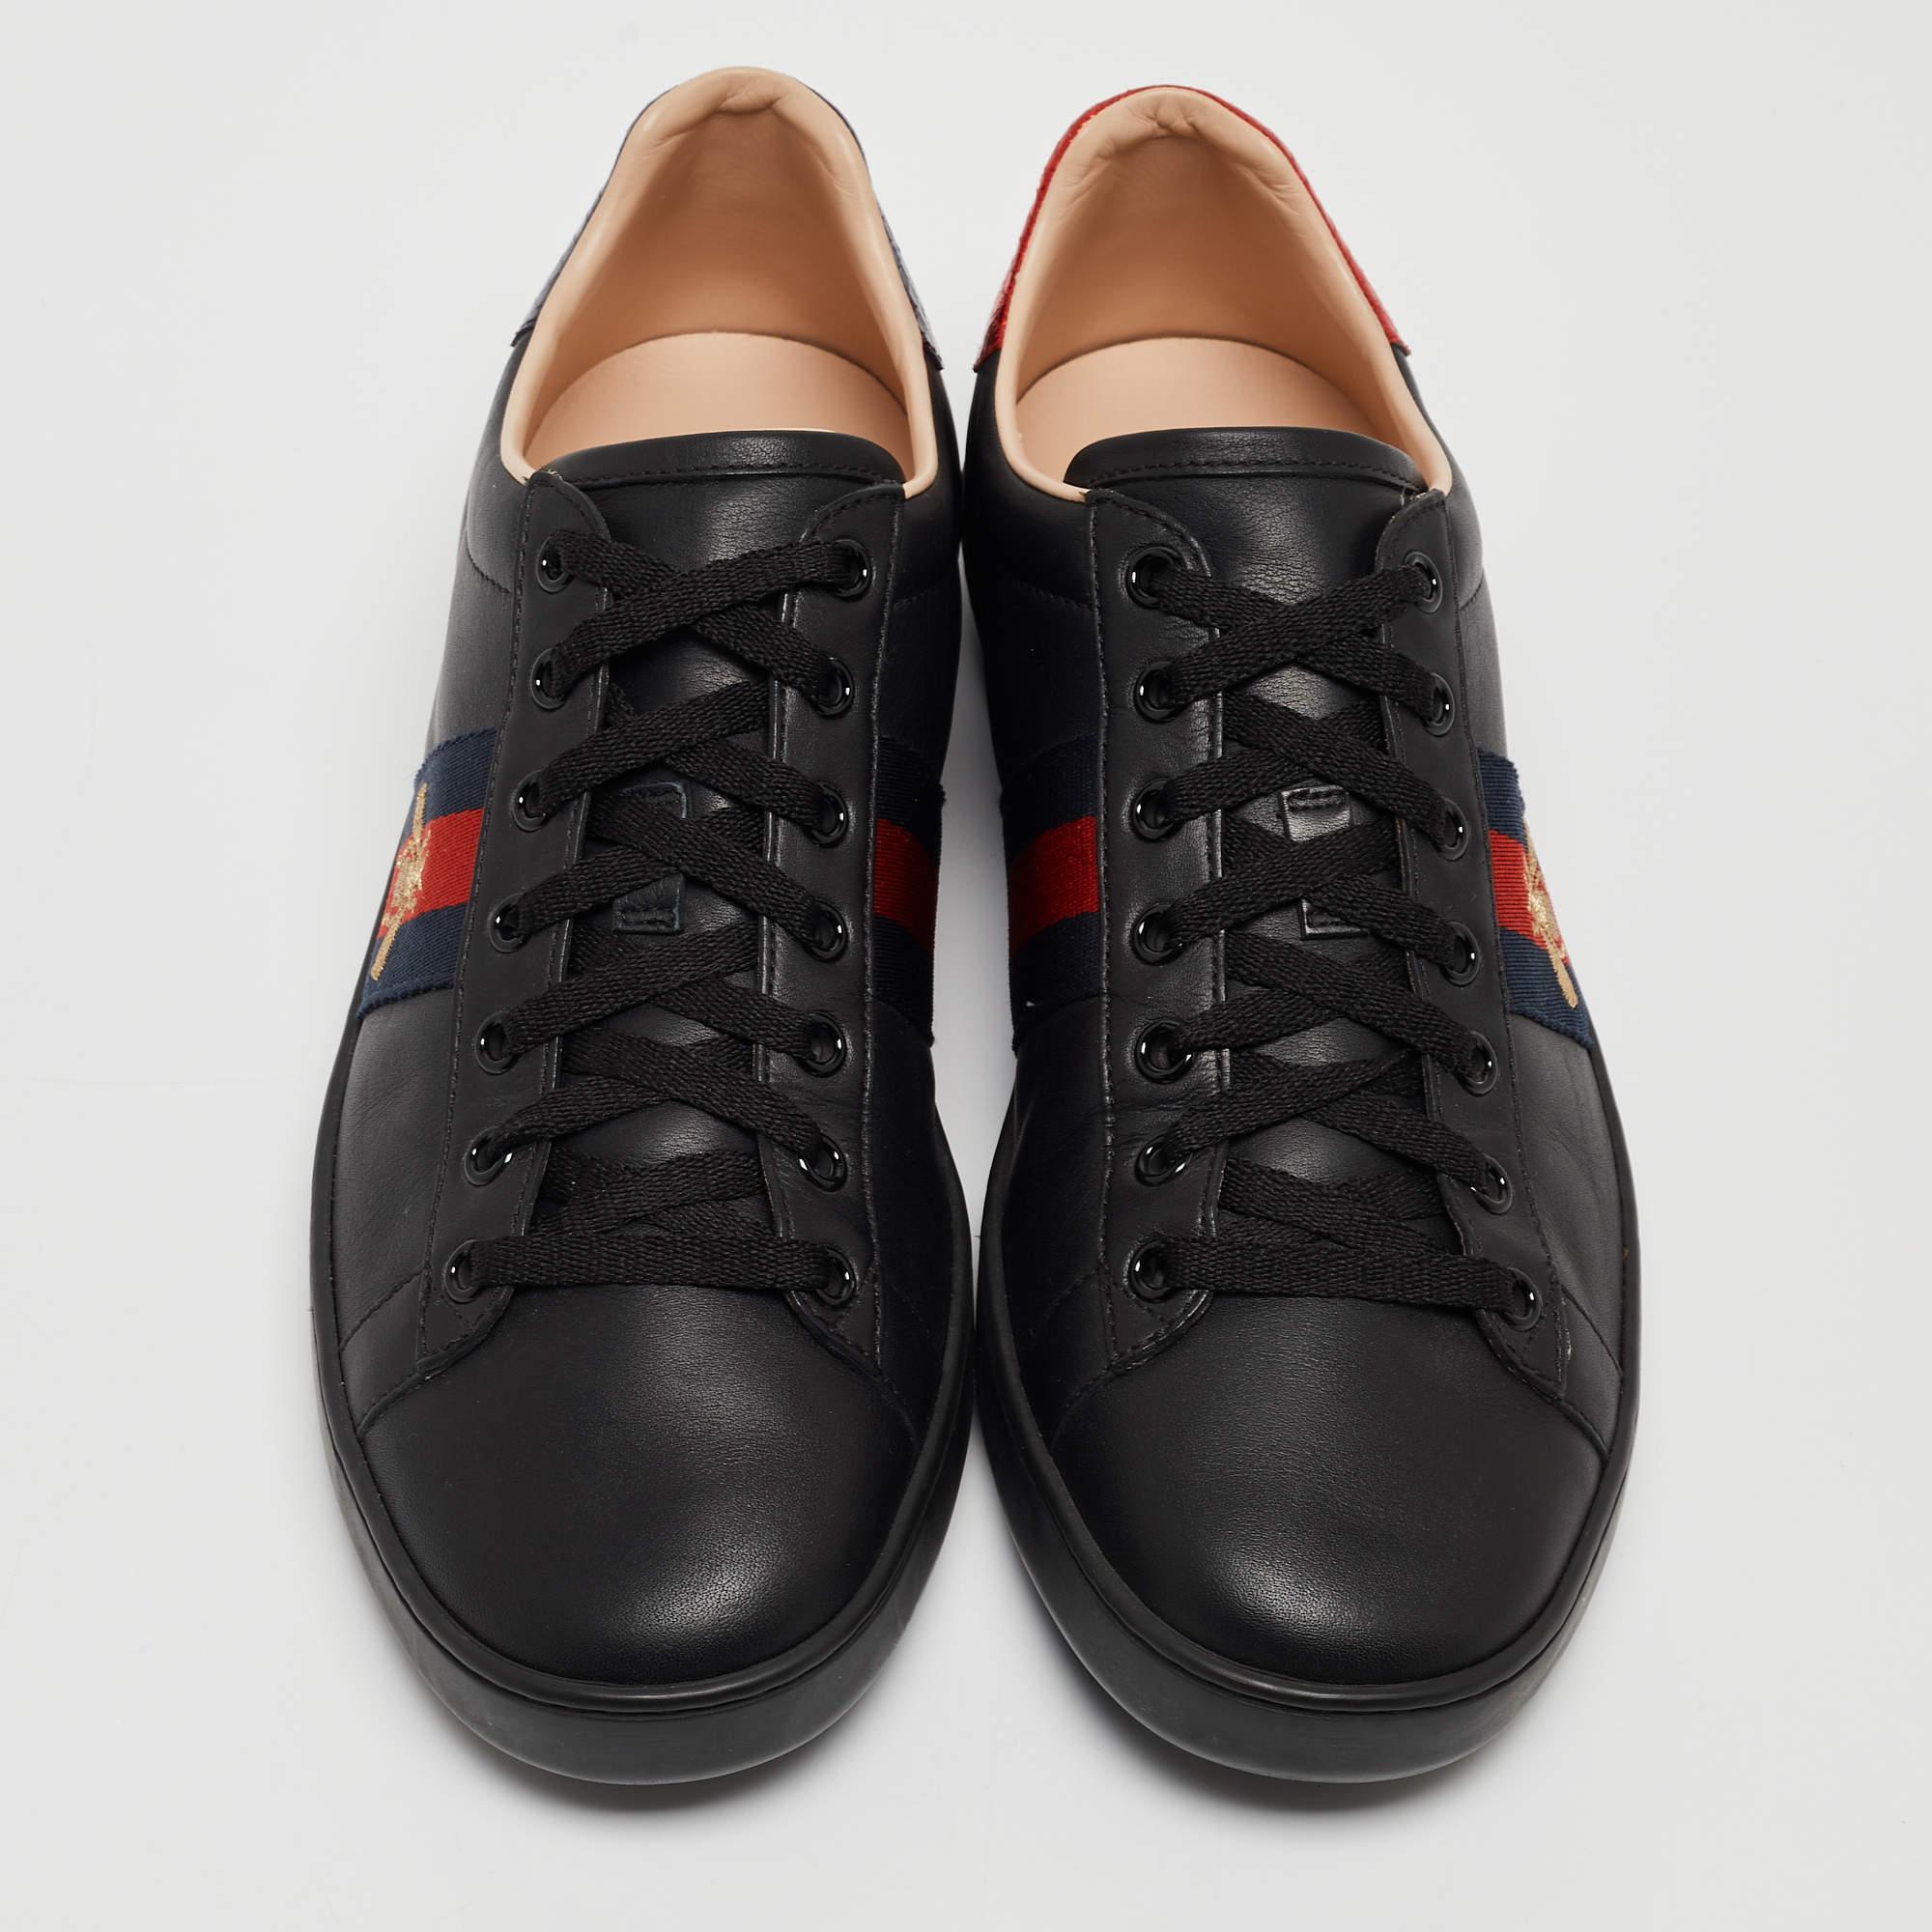 Upgrade your style with these Gucci black Ace sneakers. Meticulously designed for fashion and comfort, they're the ideal choice for a trendy and comfortable stride.

